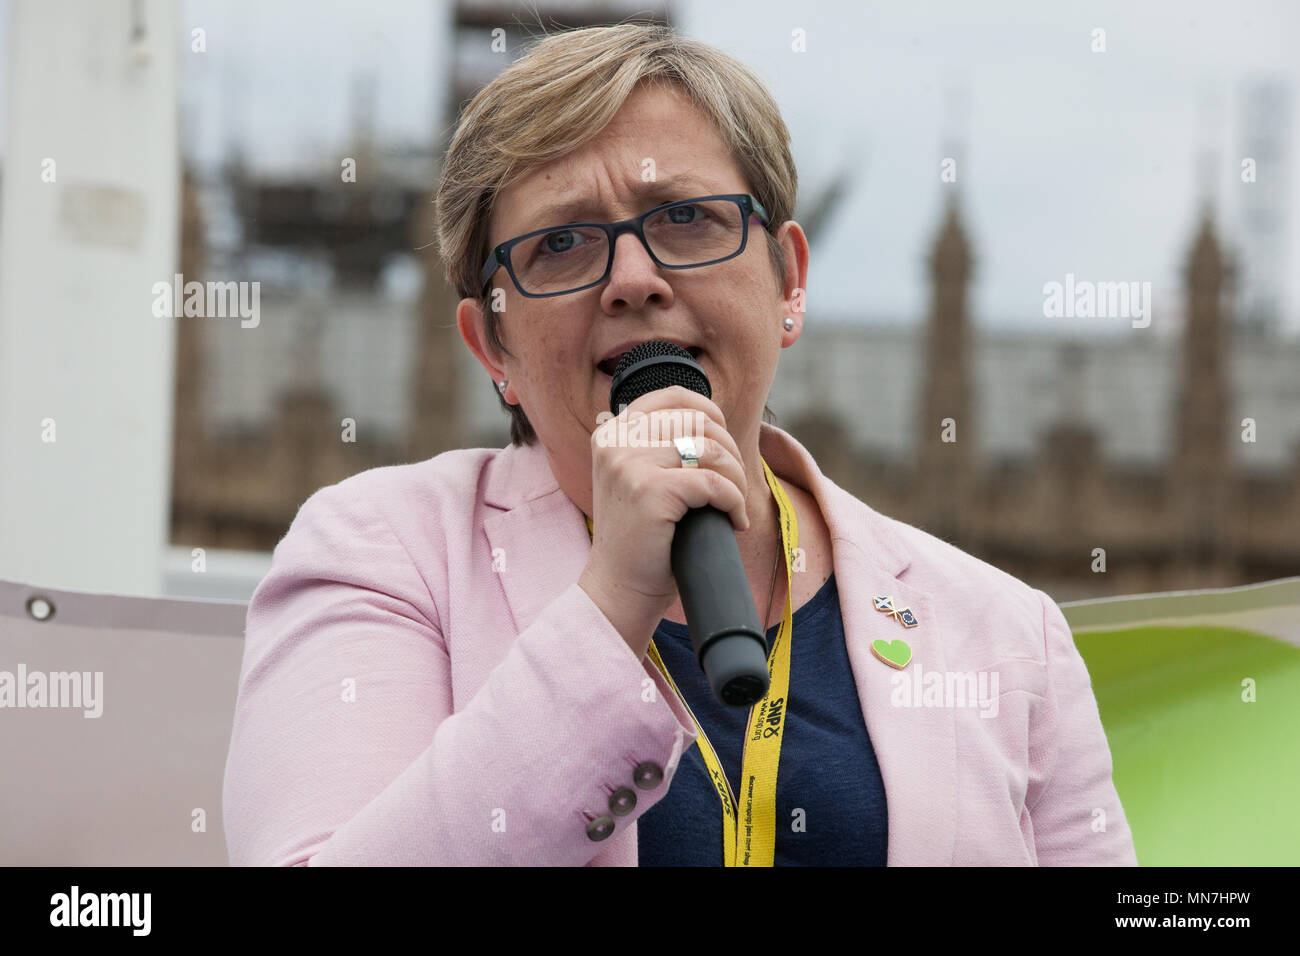 London, UK. 14th May, 2018. Joanna Cherry QC, SNP MP for Edinburgh South West, addresses Grenfell United Survivors, bereaved families and the community of Grenfell at a rally outside the Houses of Parliament on the 11th anniversary of the fire to urge the Prime Minister to accept their petition to appoint a panel of decision making experts to sit alongside Sir Martin Moore-Bick in the Grenfell Tower Public Inquiry.  The rally was timed to coincide with the debating of the petition in Parliament. Credit: Mark Kerrison/Alamy Live News Stock Photo